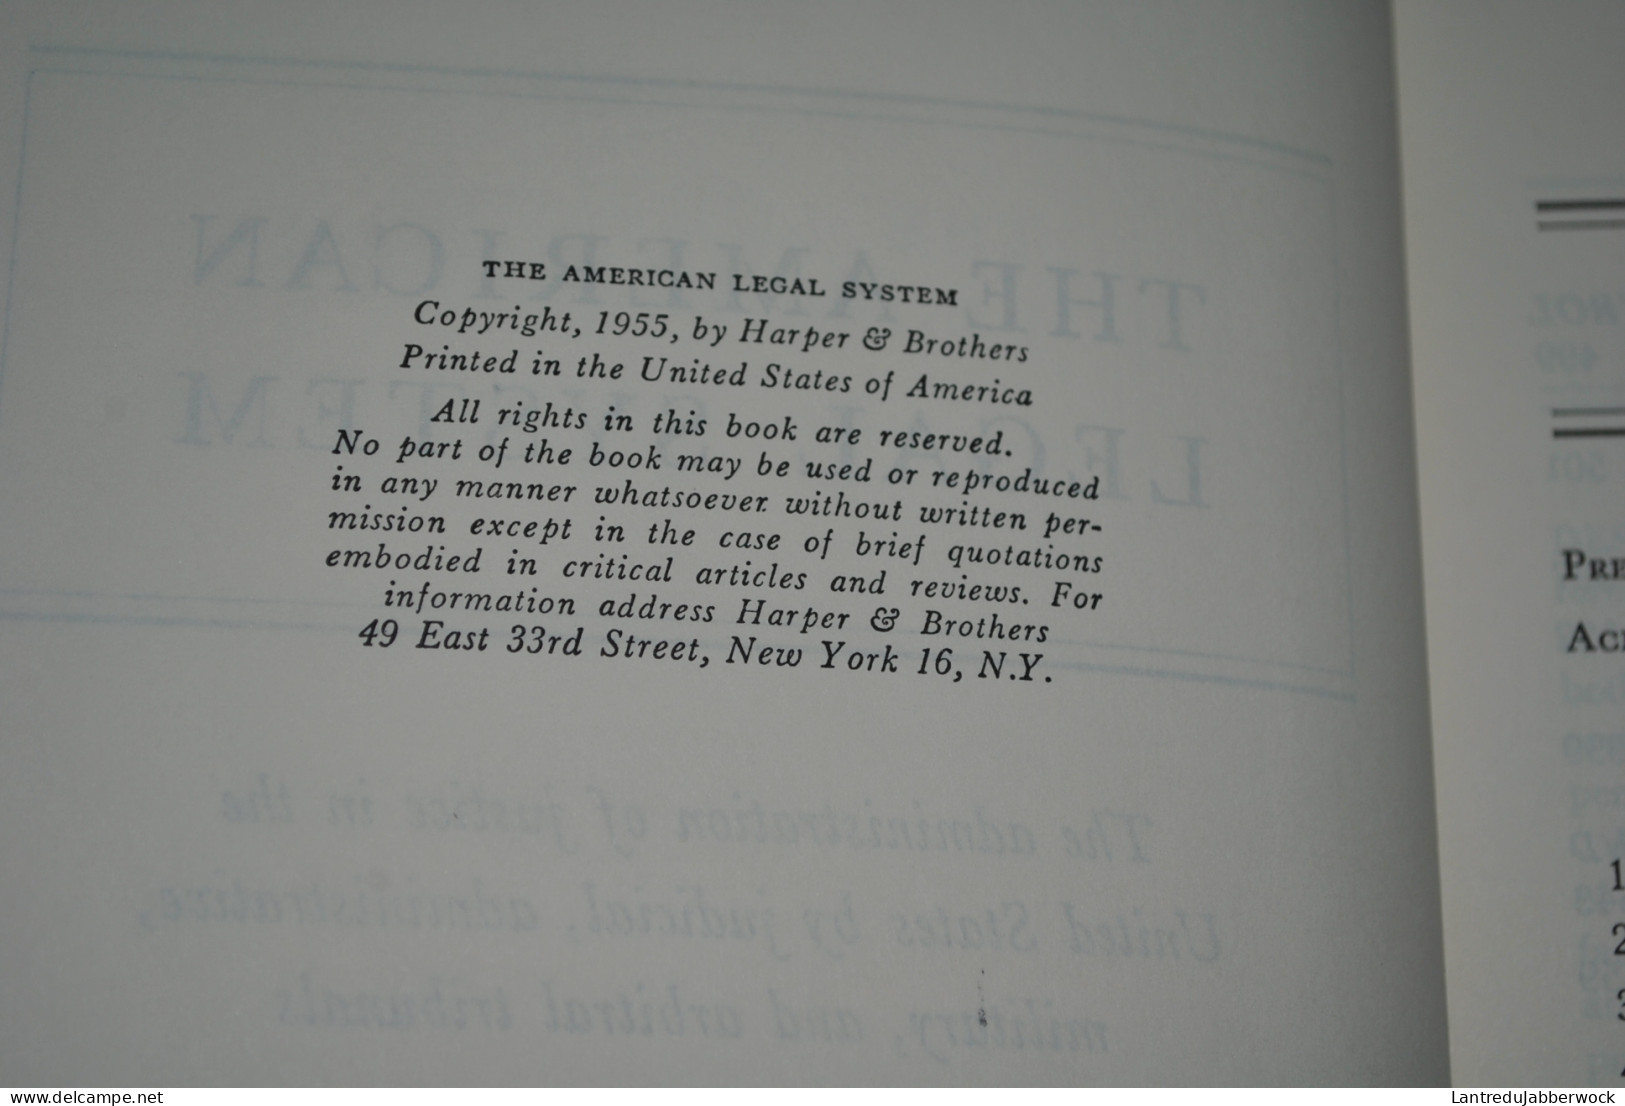 Mayers, Lewis THE AMERICAN LEGAL SYSTEM THE ADMINISTRATION OF JUSTICE IN THE UNITED STATES Dédicace 1961 Scarce Rare - 1950-Heute